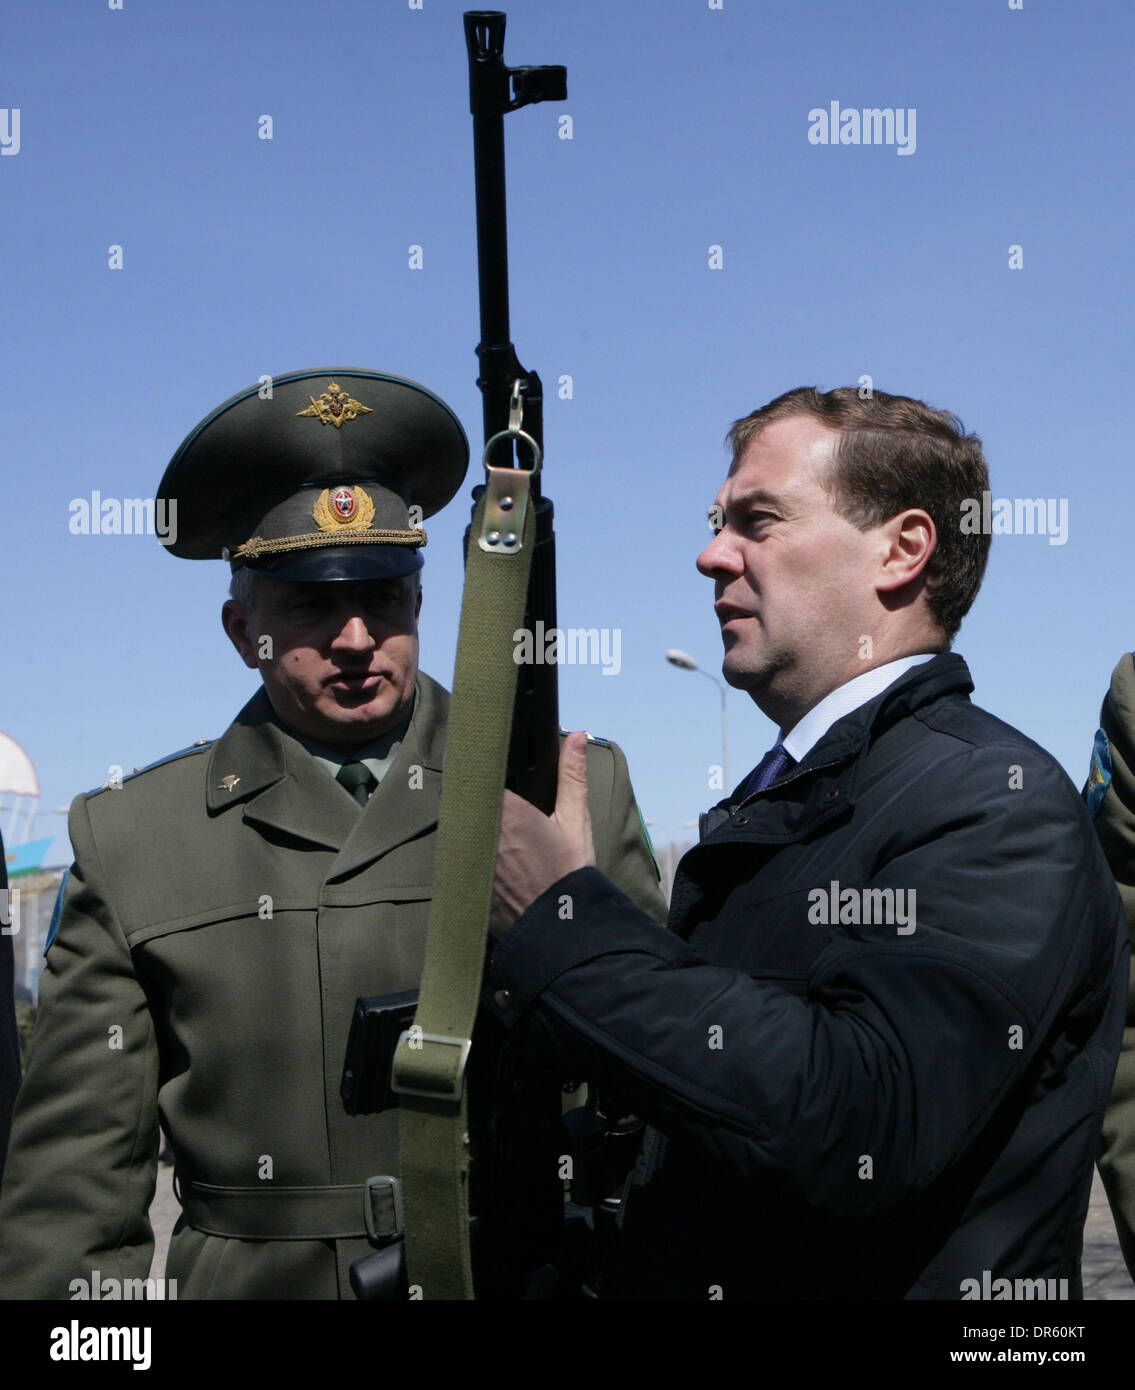 Apr 22, 2009 - Ryazan, Russia - President of Russia DMITRY MEDVEDEV checks out a sniper rifle during a visit to Ryazan paratrooper military academy. (Credit Image: © PhotoXpress/ZUMA Press) Stock Photo